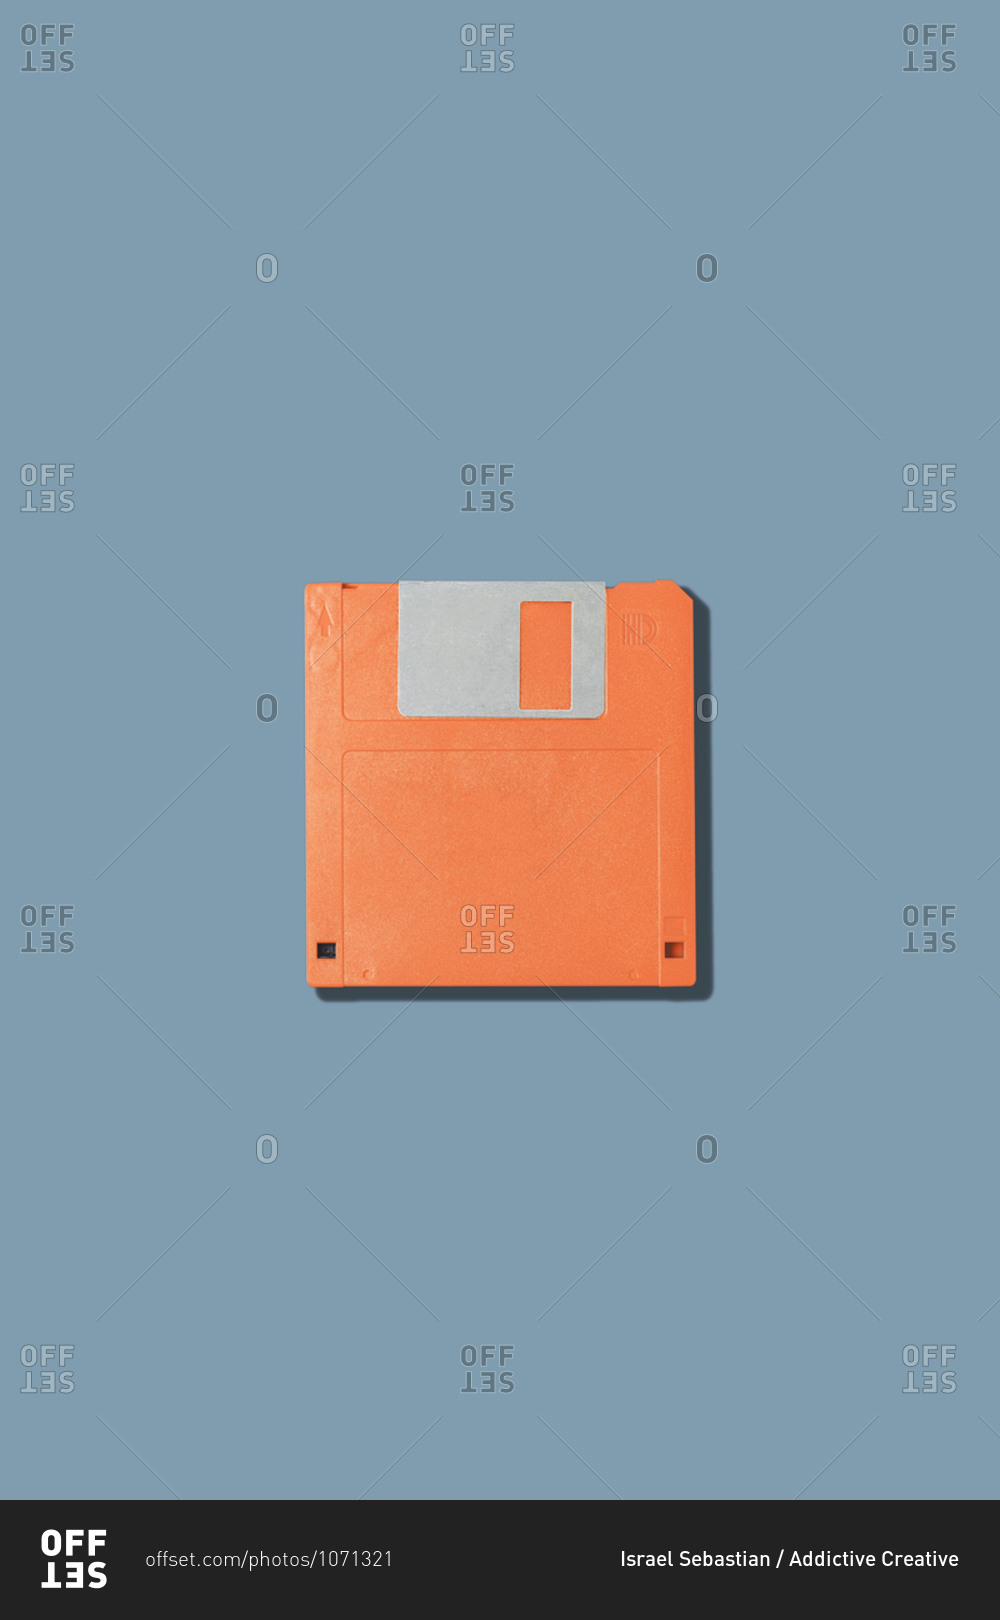 Top view of old fashioned orange magnetic floppy disk for computer placed on gray background